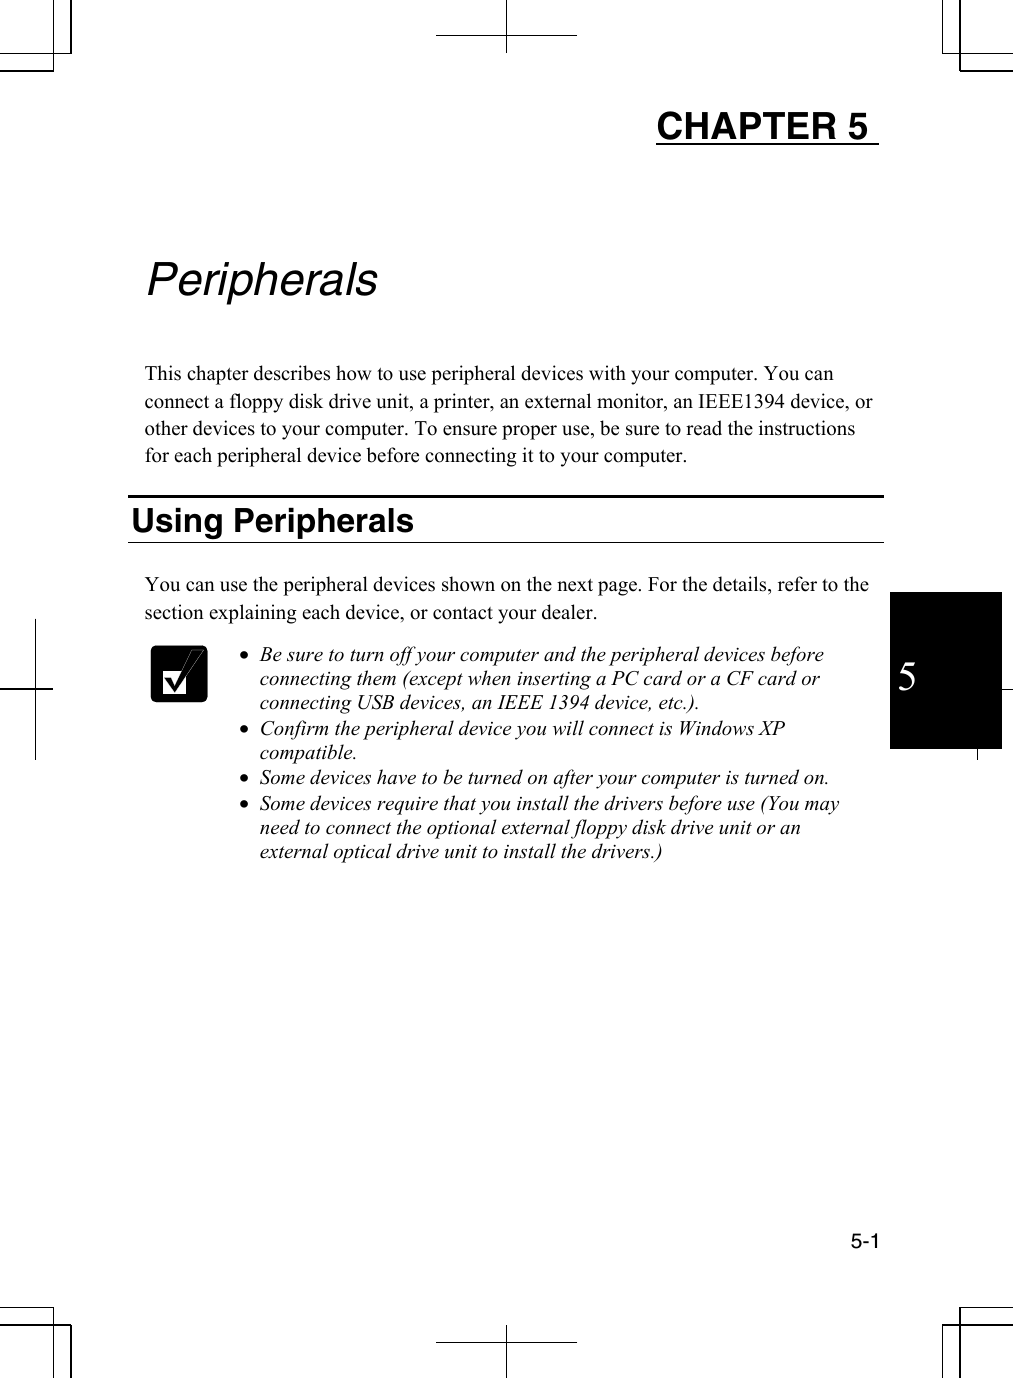  5-1  5 CHAPTER 5     Peripherals  This chapter describes how to use peripheral devices with your computer. You can connect a floppy disk drive unit, a printer, an external monitor, an IEEE1394 device, or other devices to your computer. To ensure proper use, be sure to read the instructions for each peripheral device before connecting it to your computer.   Using Peripherals   You can use the peripheral devices shown on the next page. For the details, refer to the section explaining each device, or contact your dealer.    •  Be sure to turn off your computer and the peripheral devices before connecting them (except when inserting a PC card or a CF card or connecting USB devices, an IEEE 1394 device, etc.).  •  Confirm the peripheral device you will connect is Windows XP compatible. •  Some devices have to be turned on after your computer is turned on.  •  Some devices require that you install the drivers before use (You may need to connect the optional external floppy disk drive unit or an external optical drive unit to install the drivers.)     